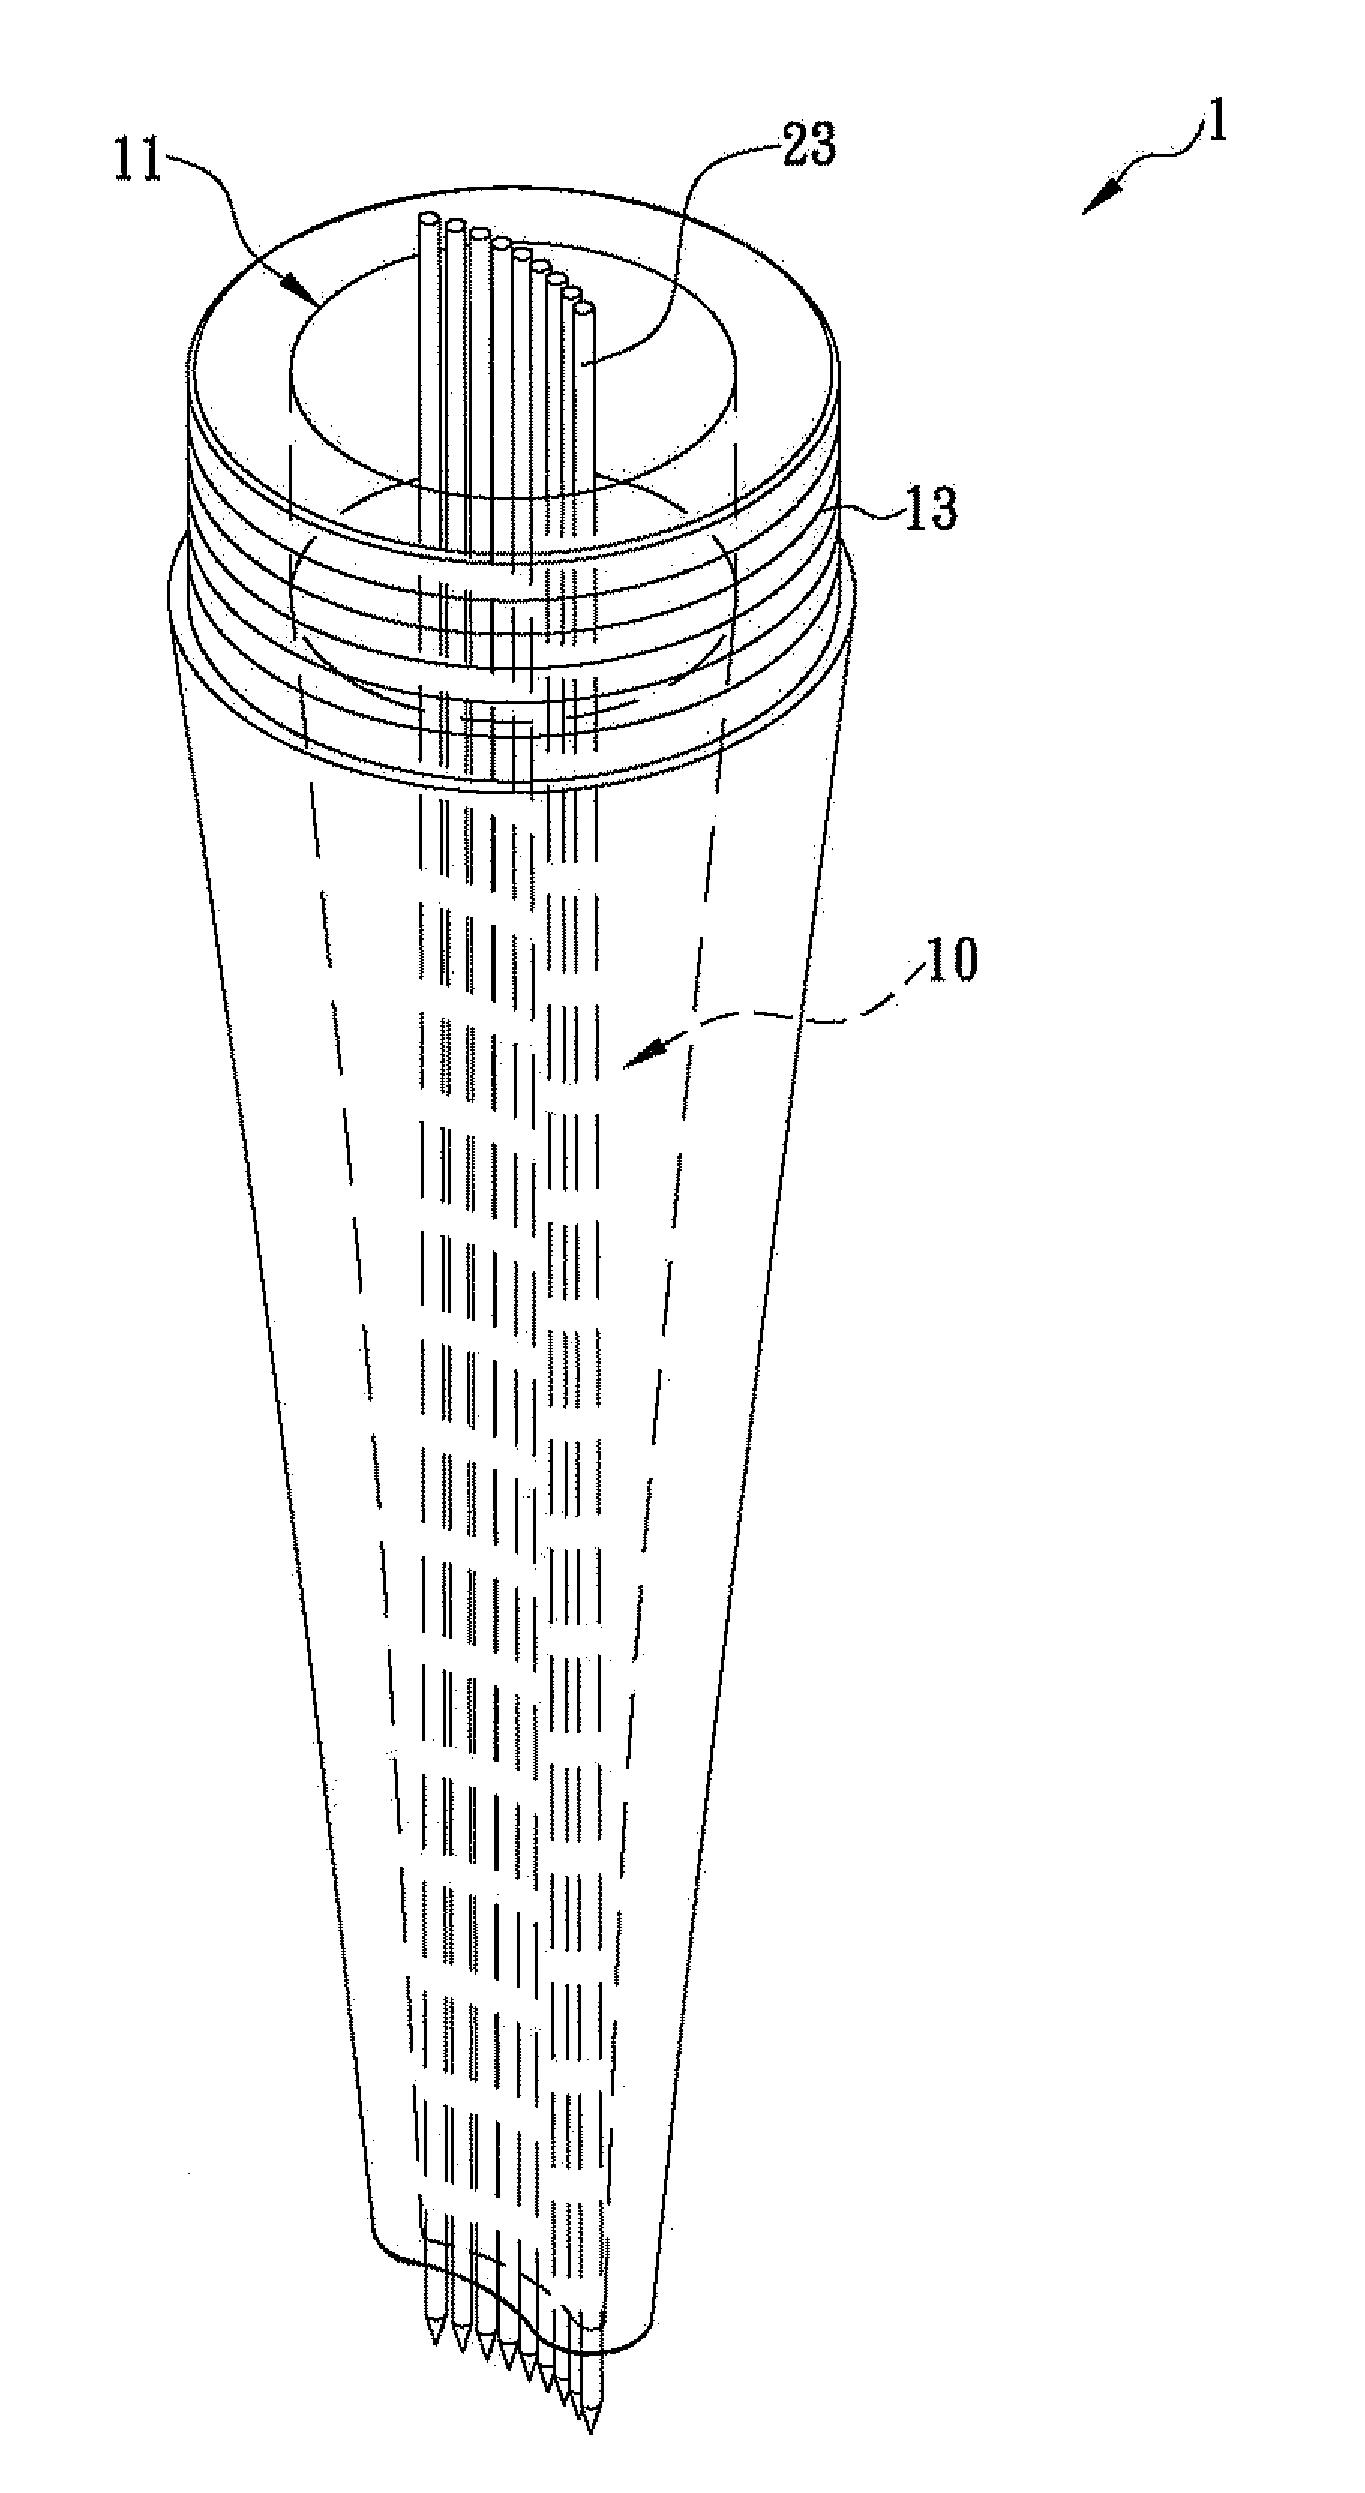 Tattoo needle guide tube with curved through hole